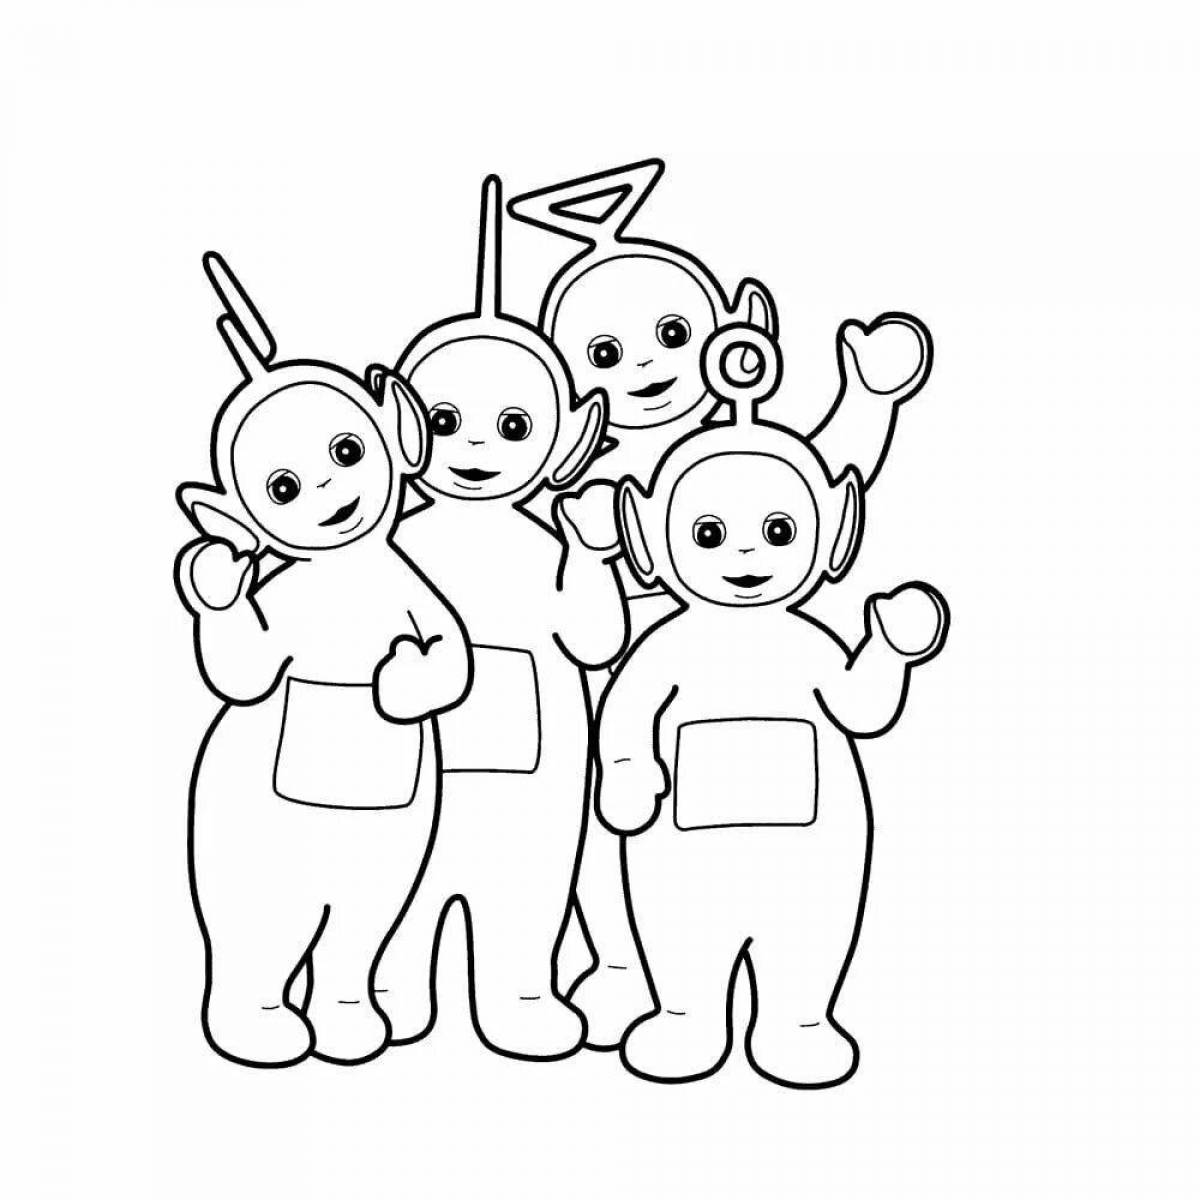 Slender-tubbies animated coloring page